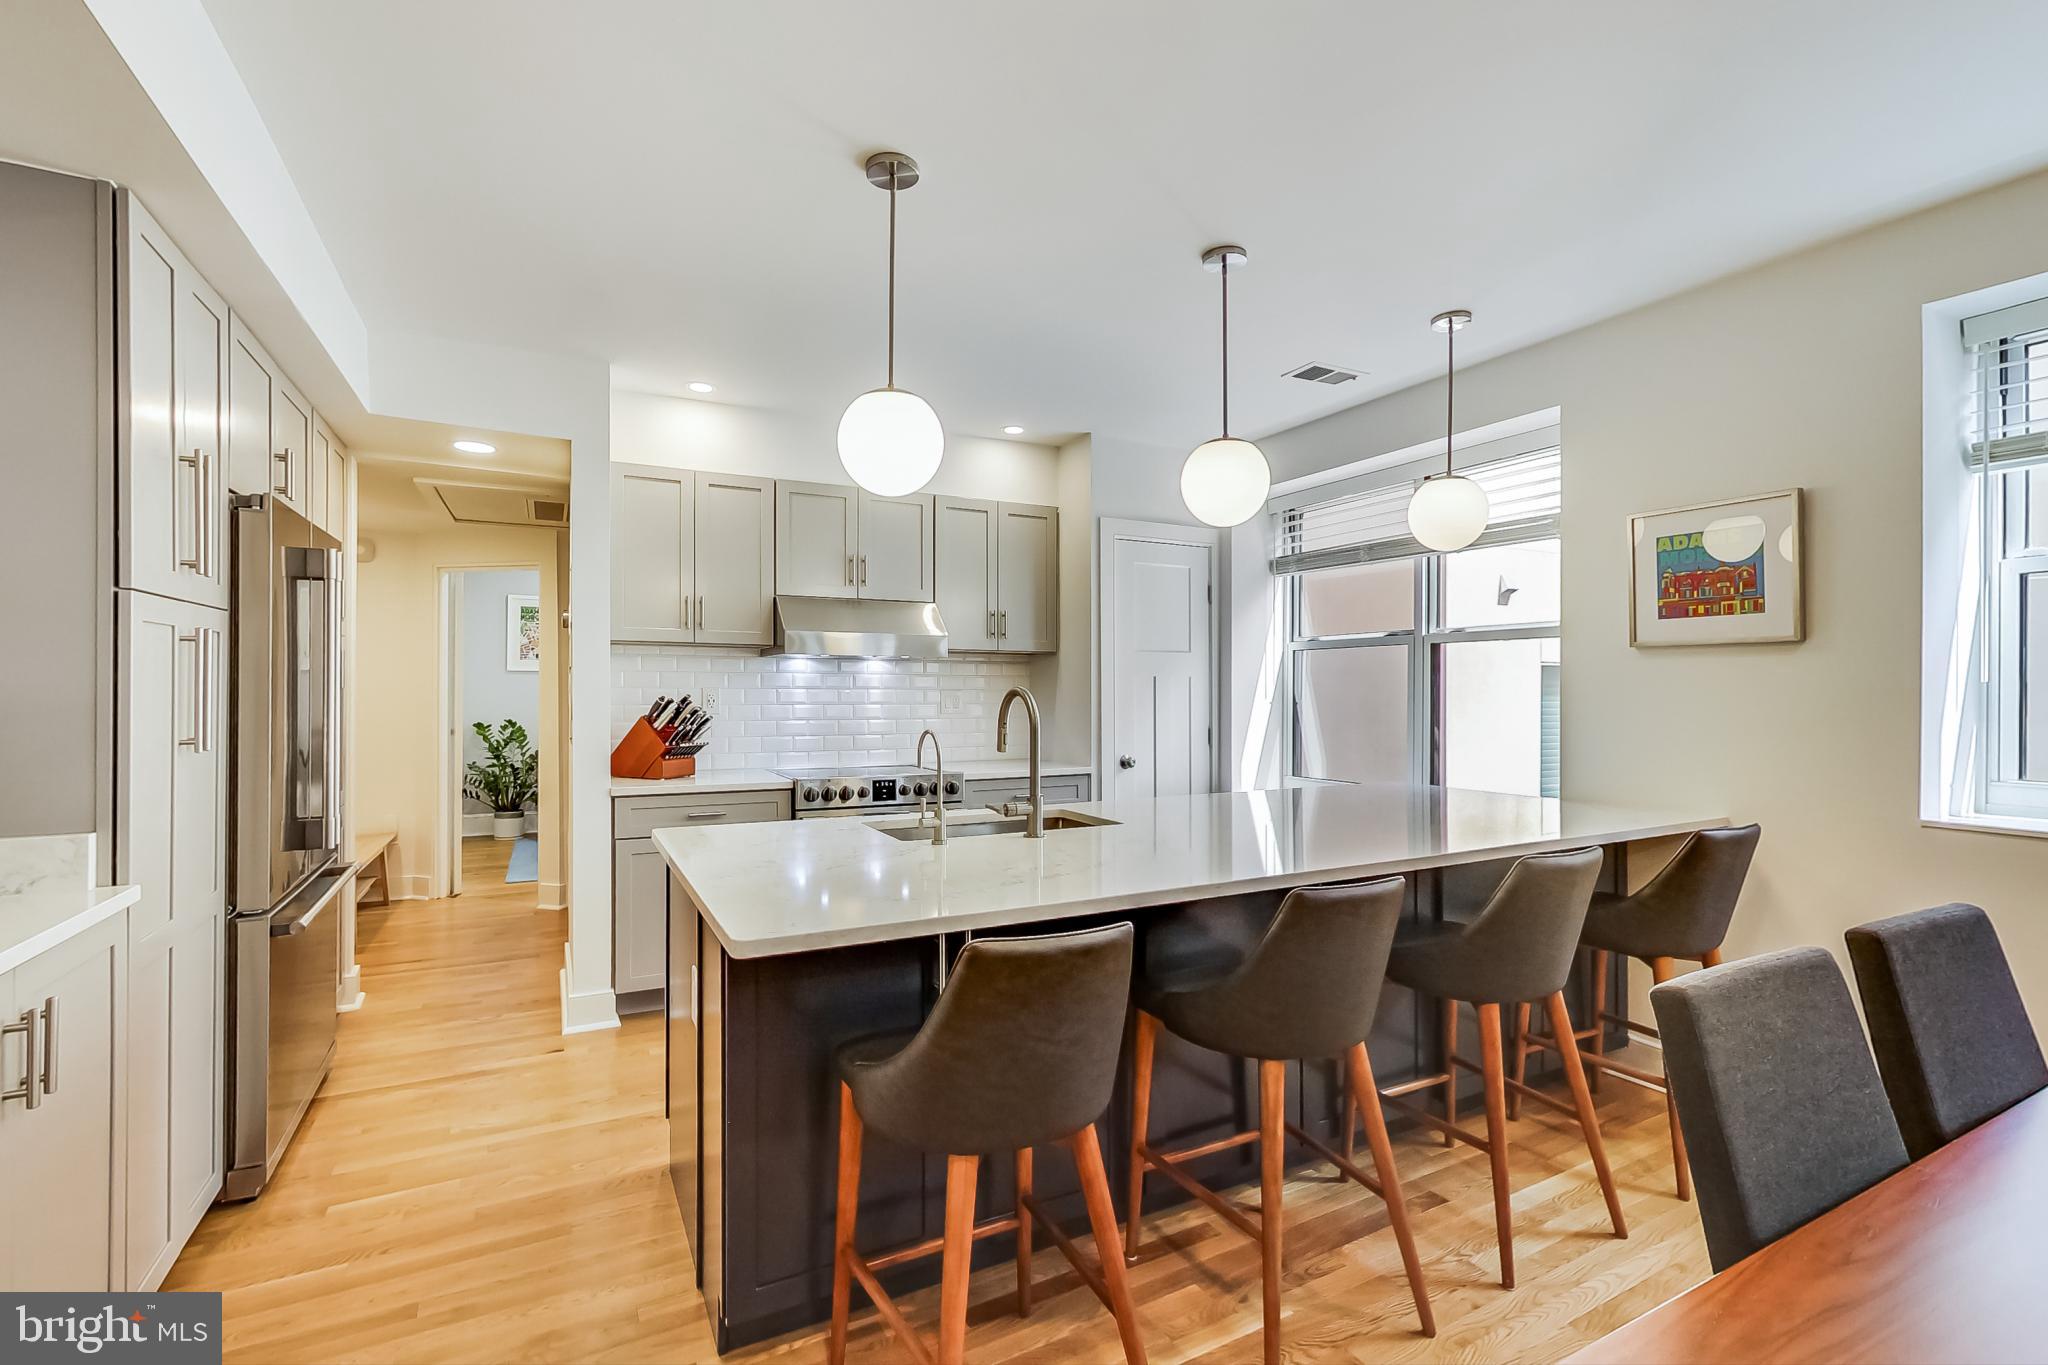 a kitchen with stainless steel appliances kitchen island granite countertop a table chairs and a wooden floor